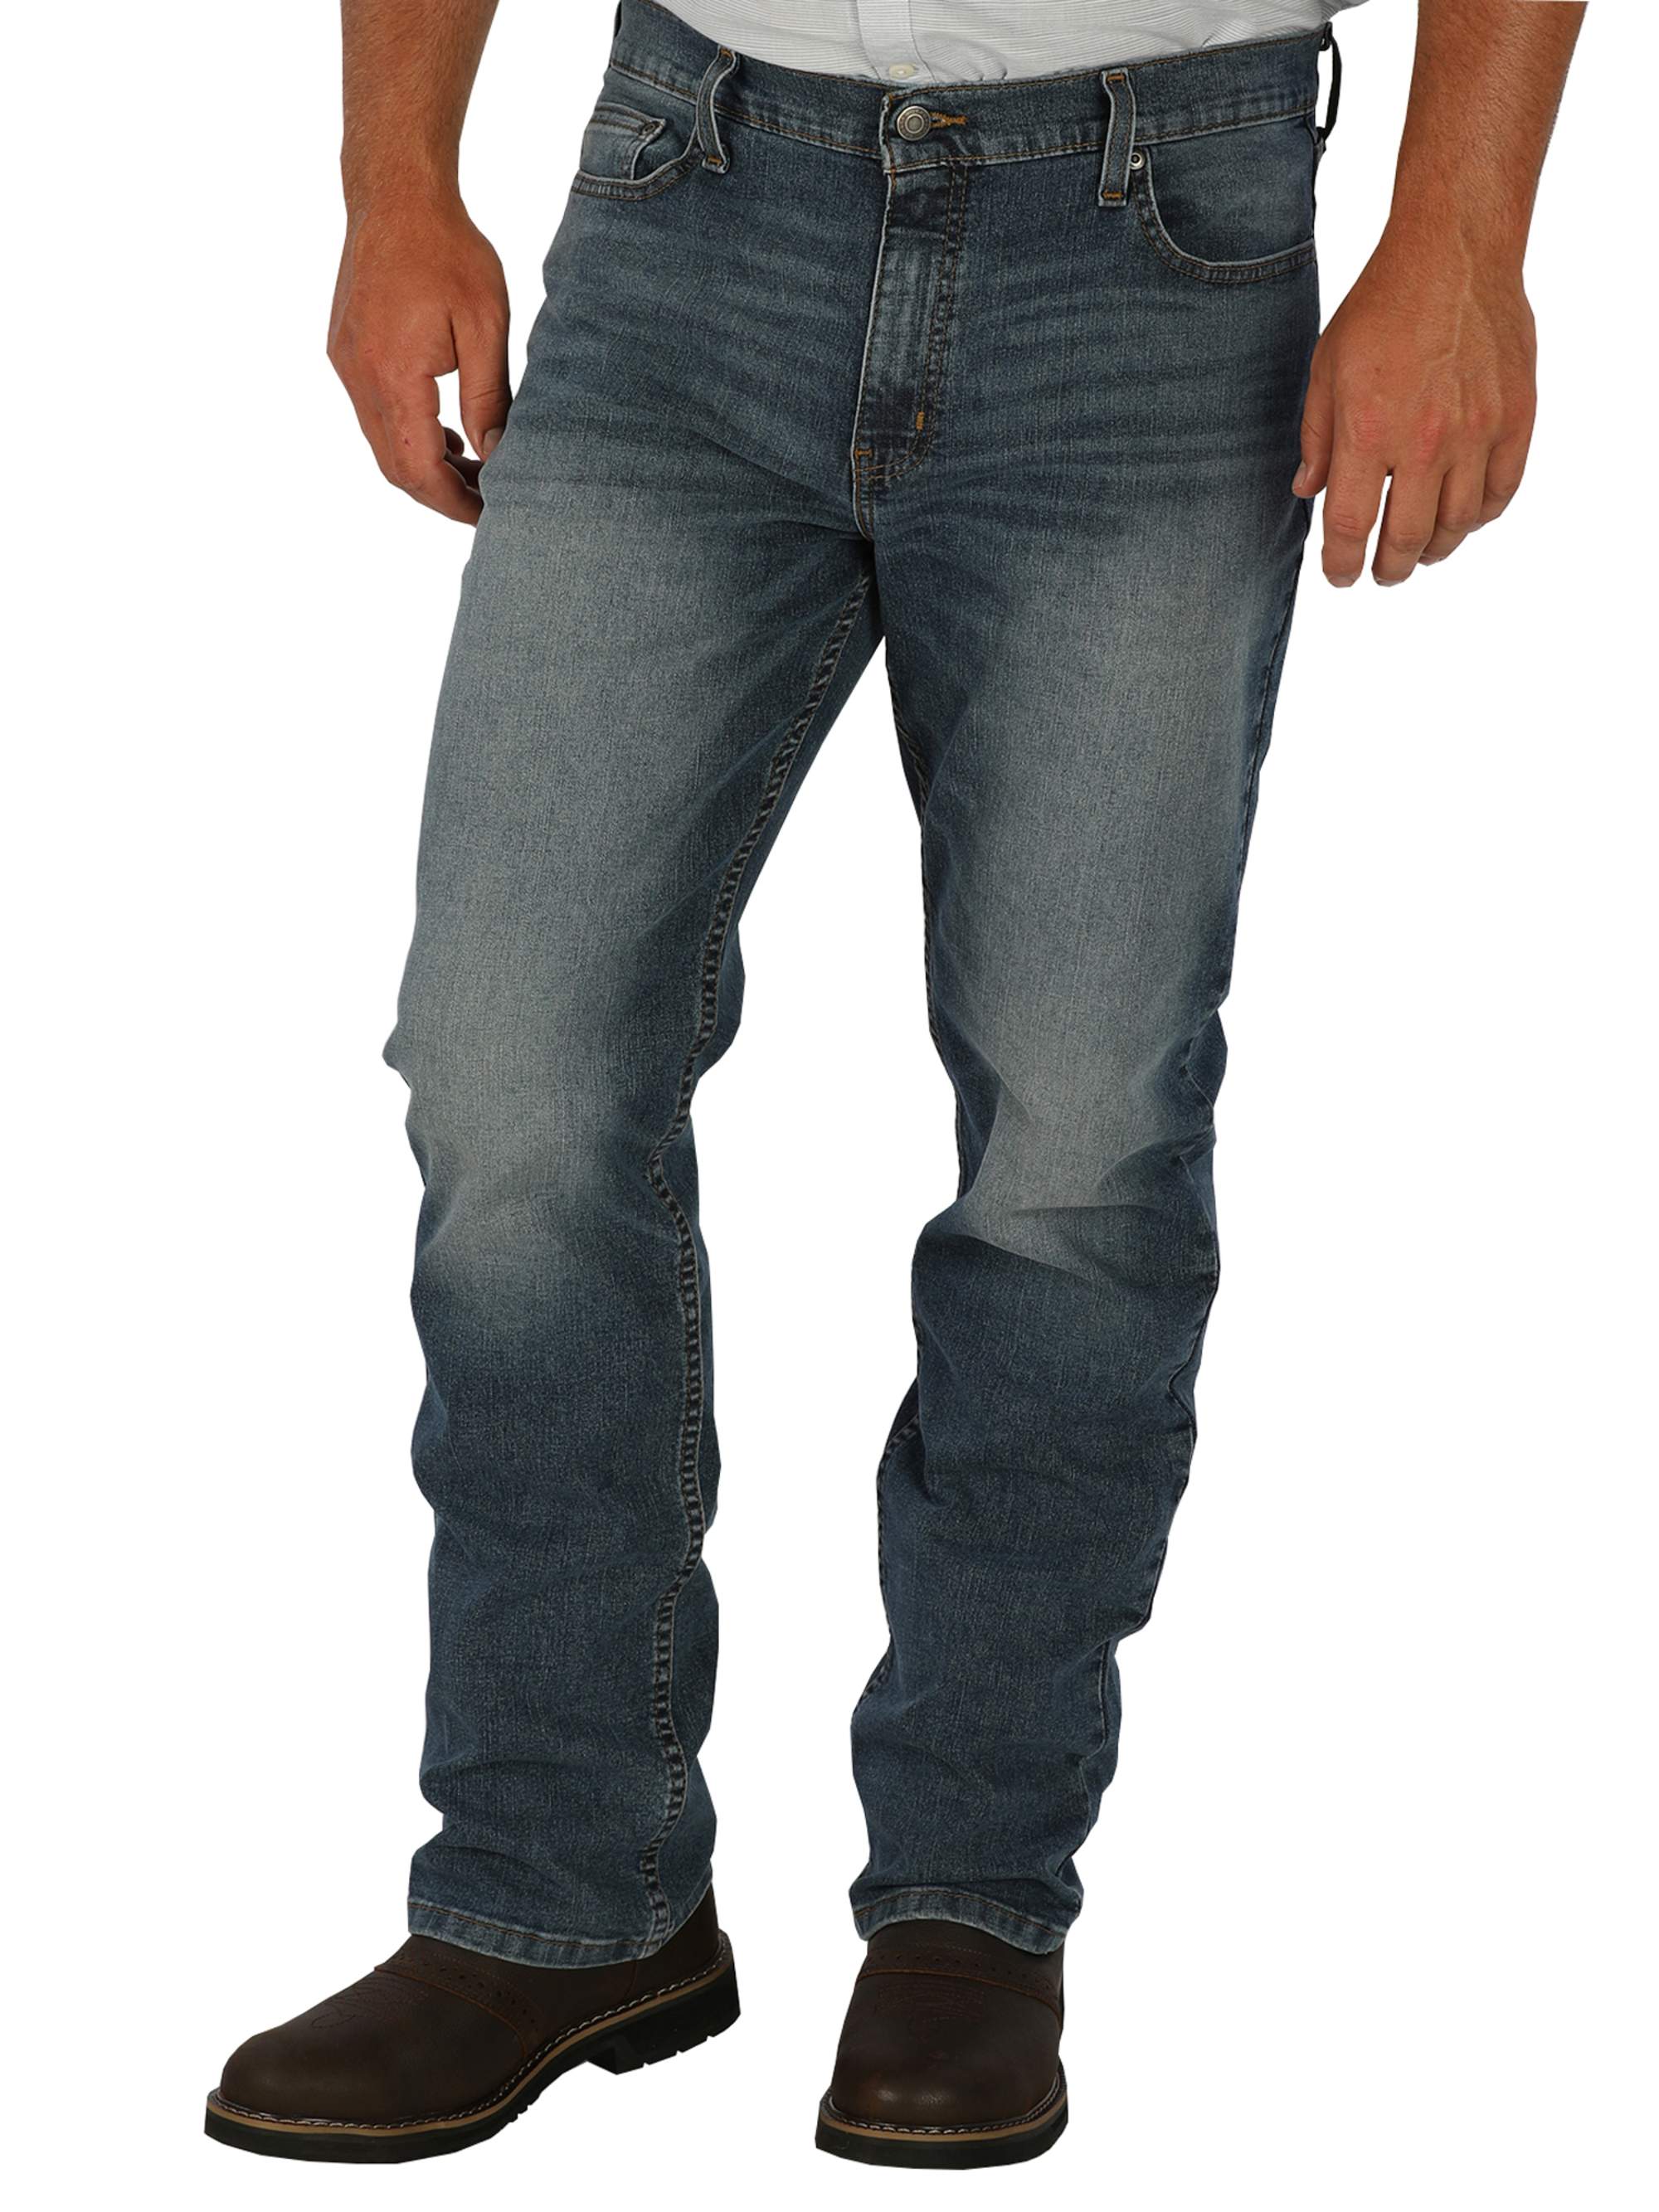 George Men's Bootcut Jeans - image 1 of 5